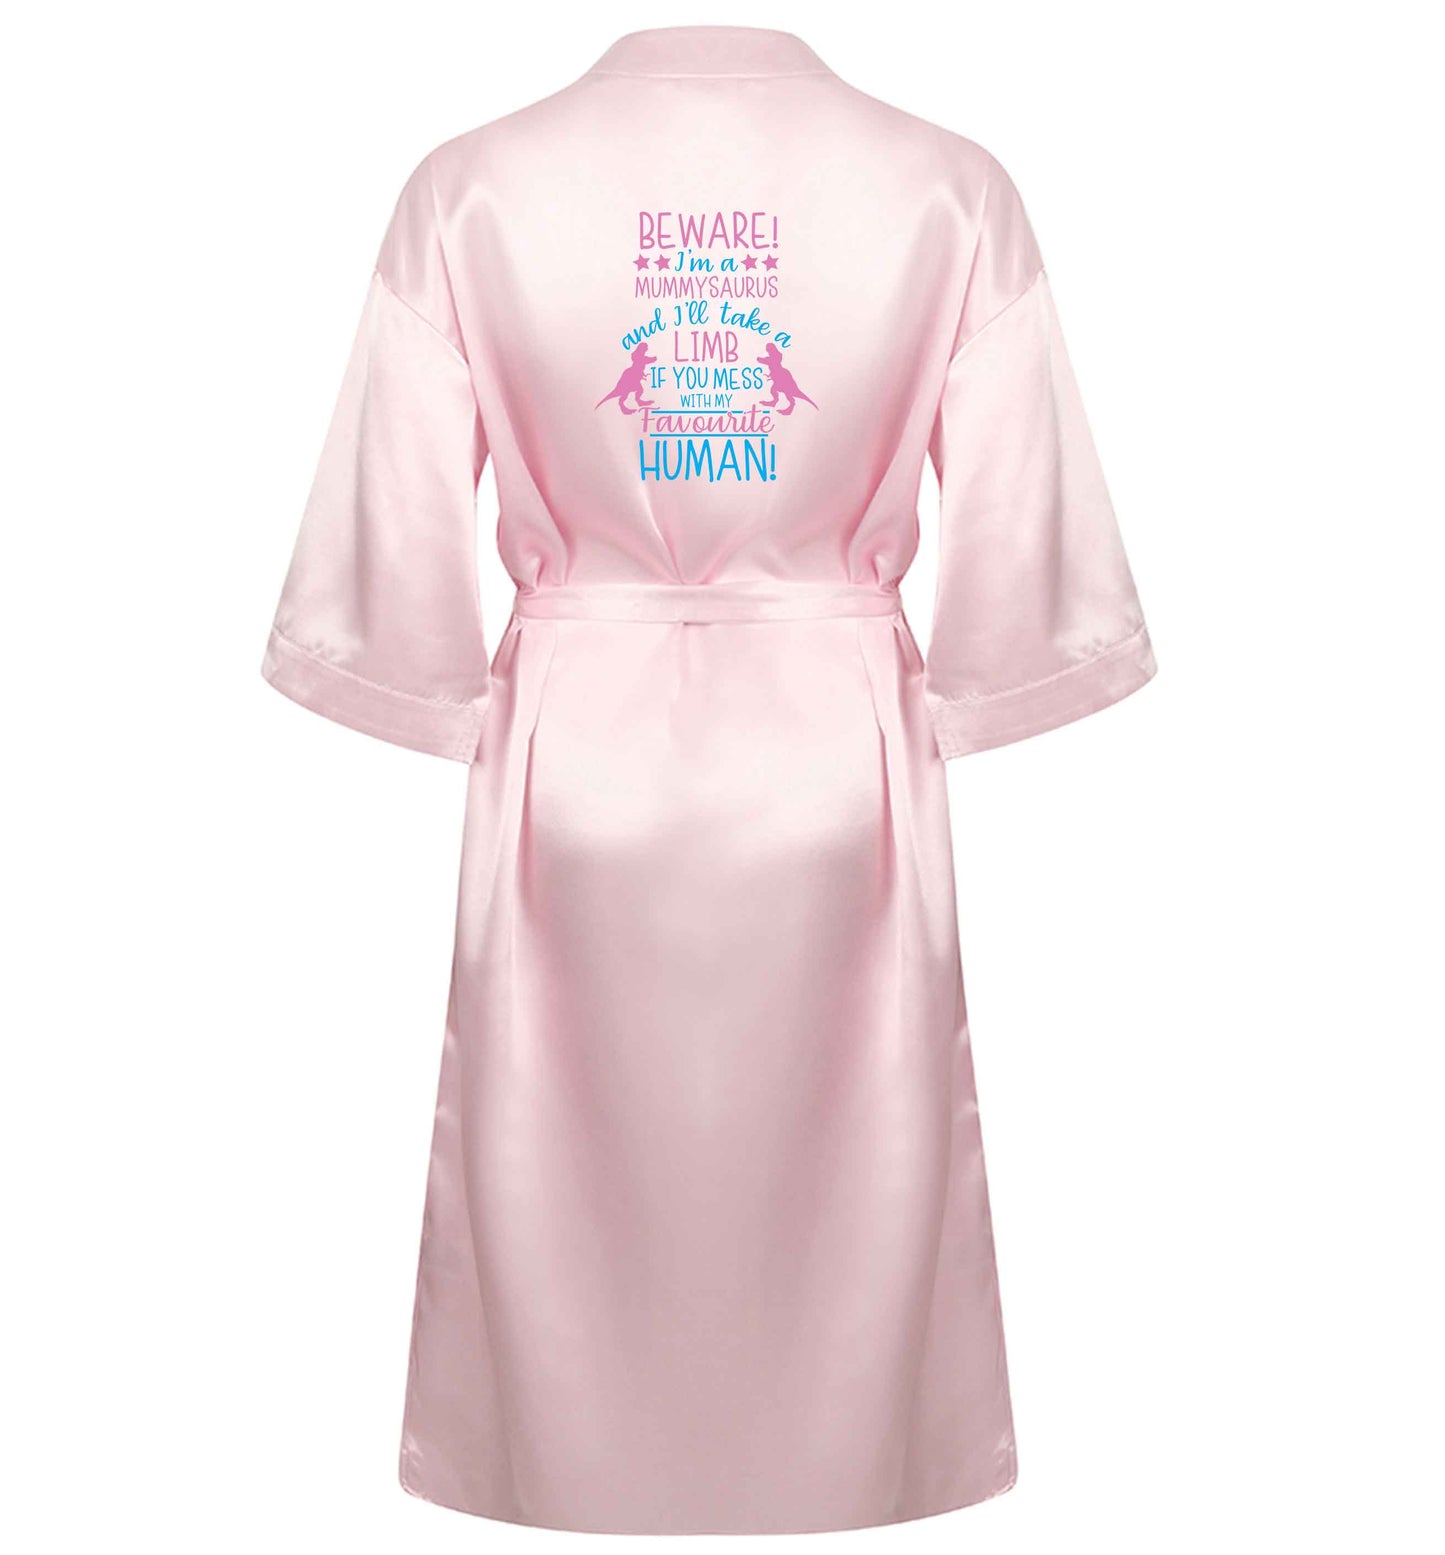 Perfect gift for any protective mummysaurus! Beware I'm a mummysaurus and I'll take a limb if you mess with my favourite human XL/XXL pink  ladies dressing gown size 16/18